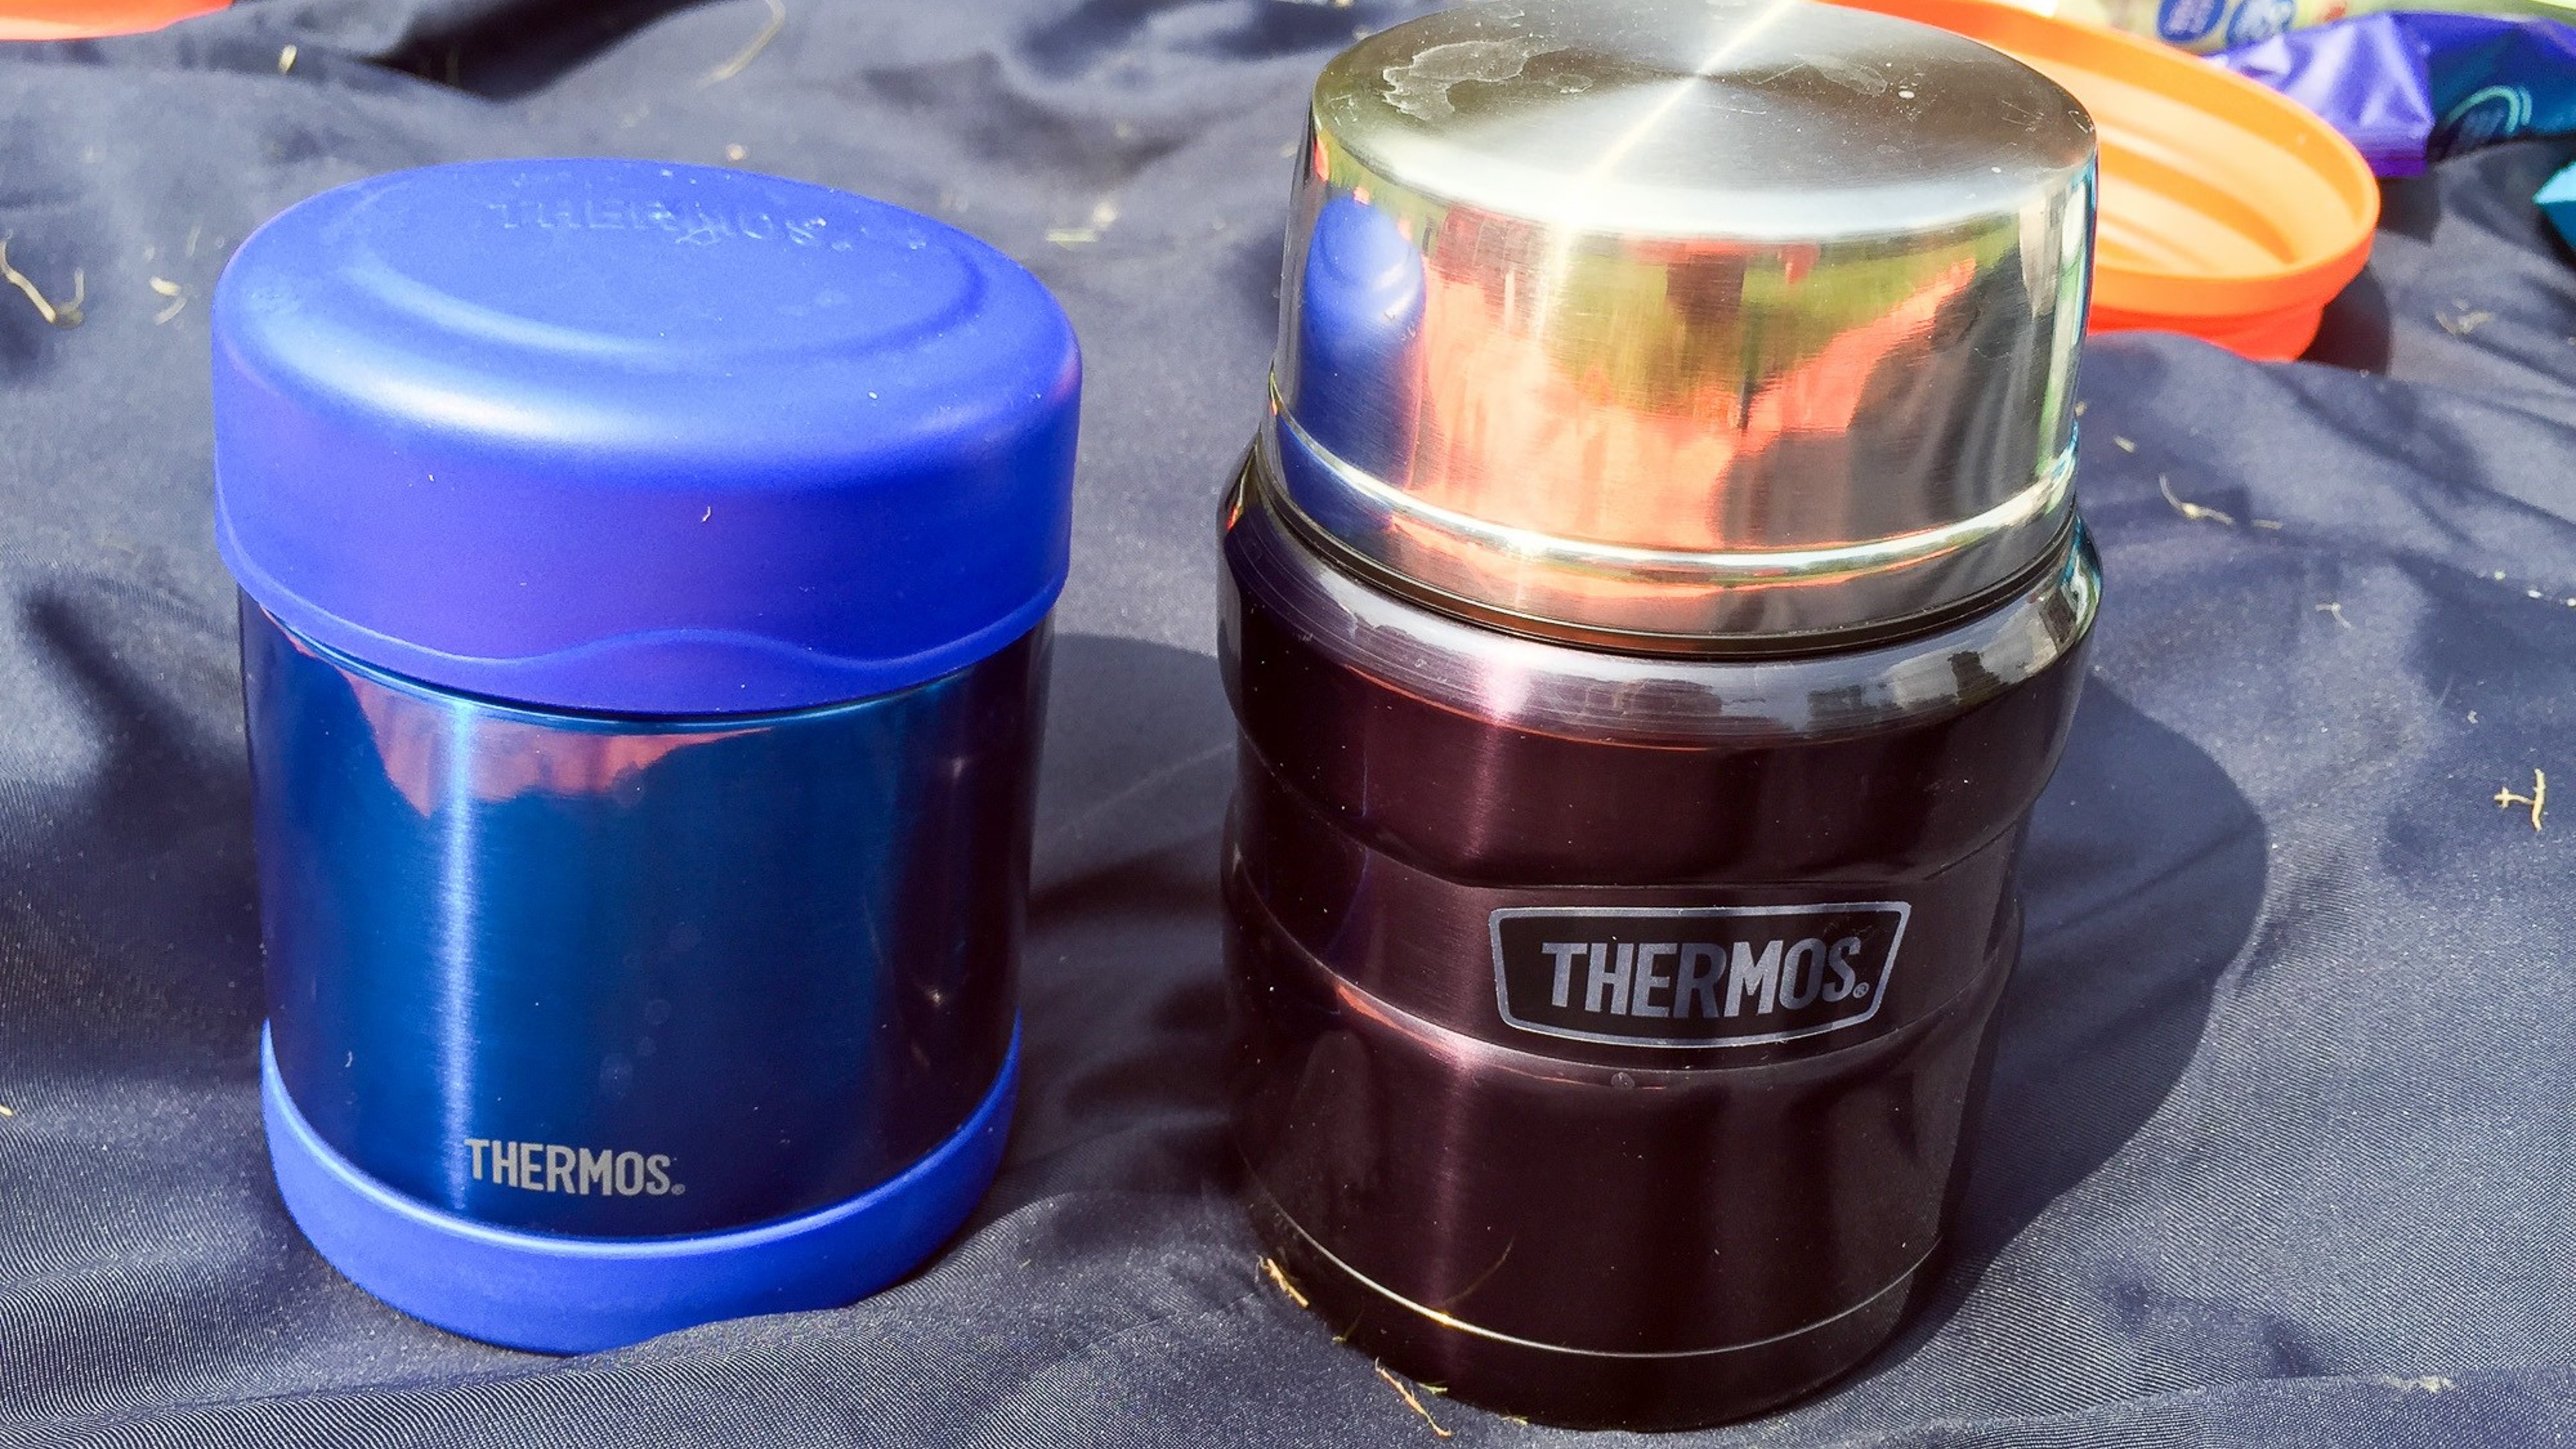 Photo of thermos flasks